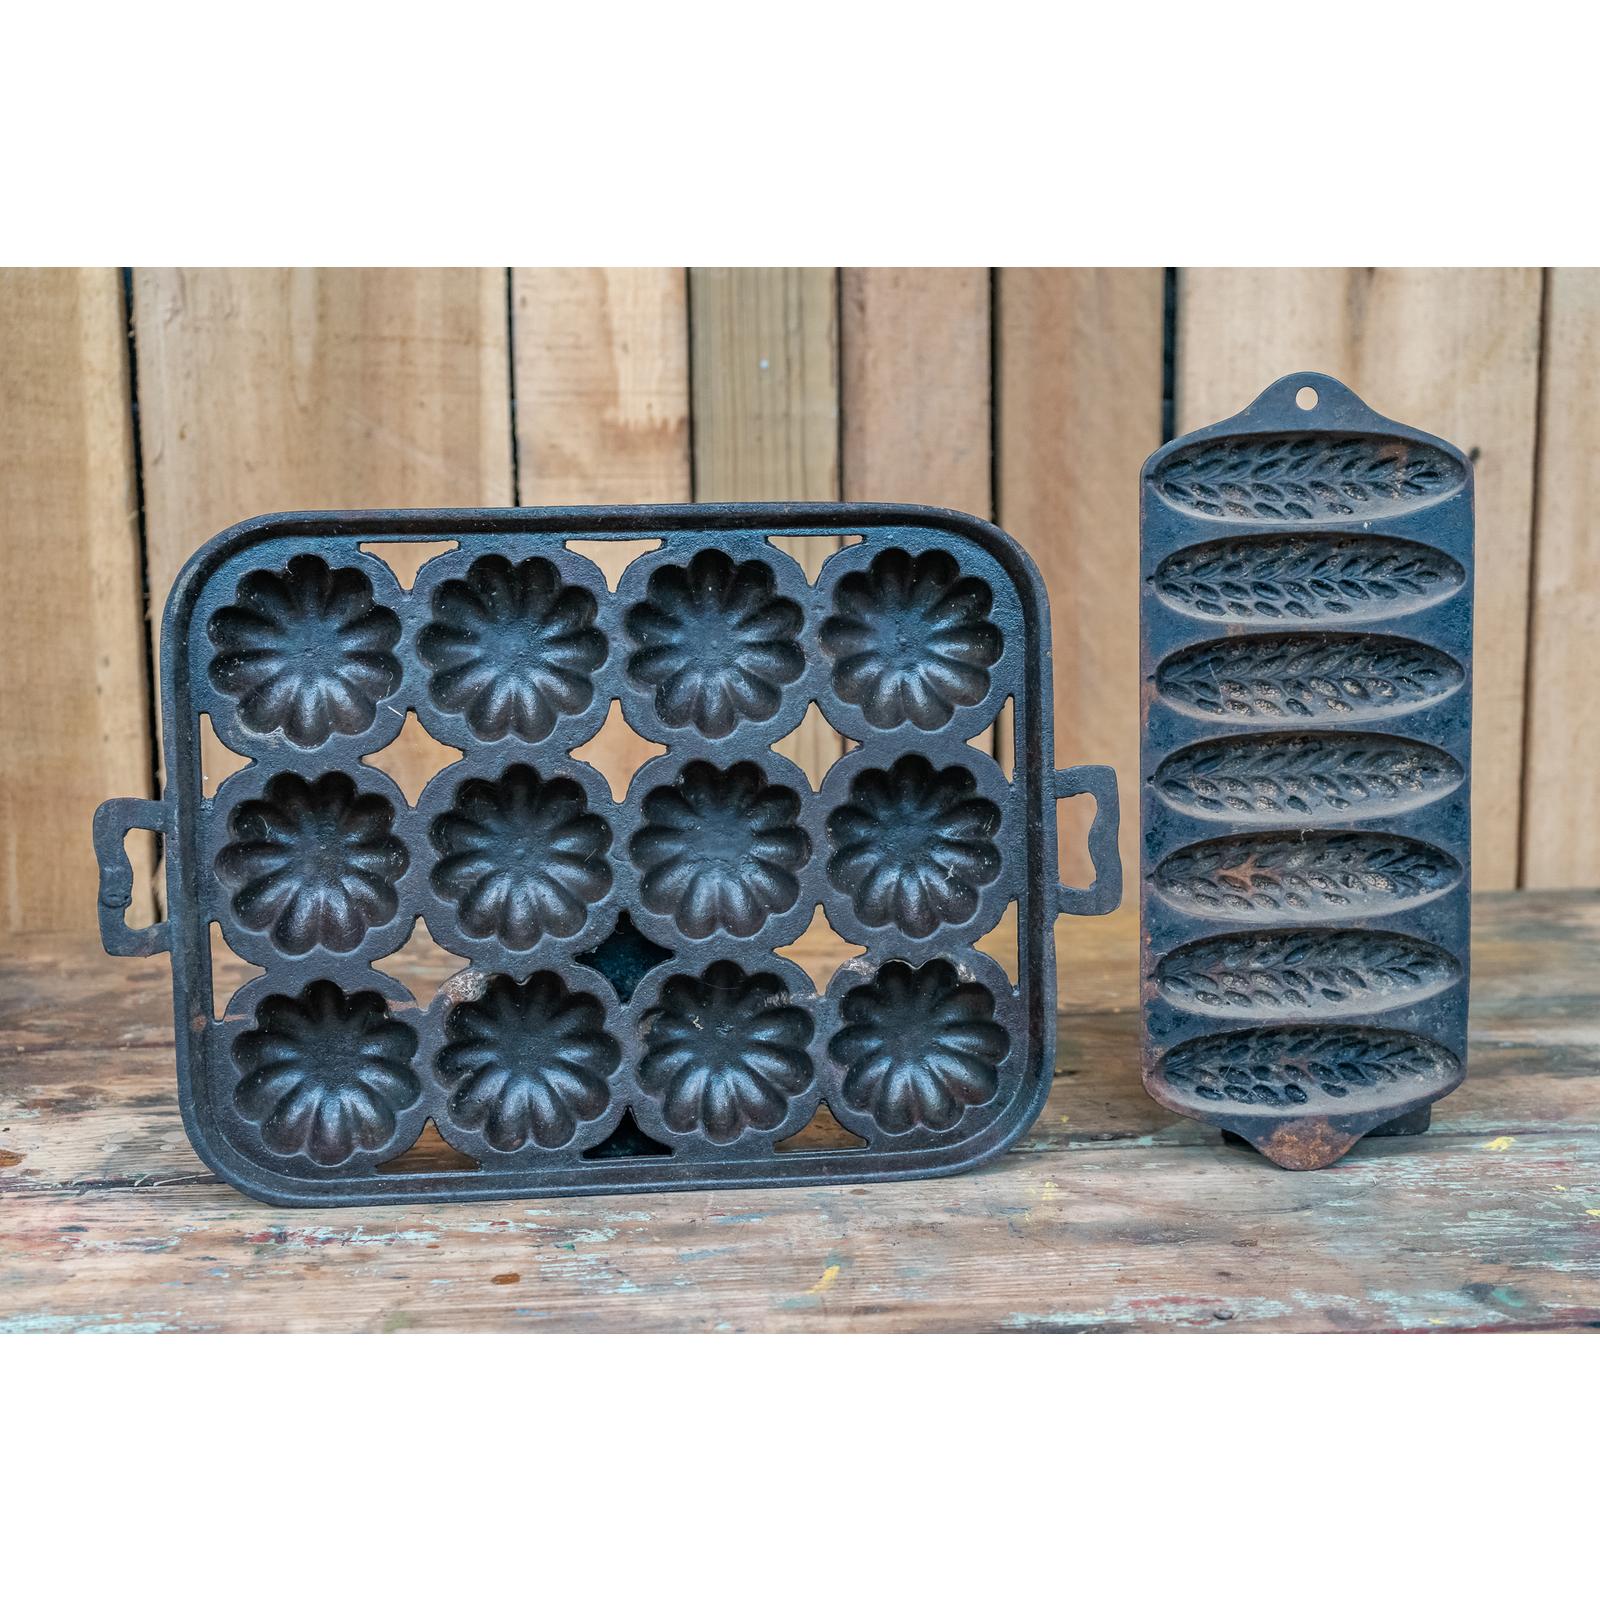 Antique Vintage Cast Iron Turks Head #20 Muffin Pan 12 Cup